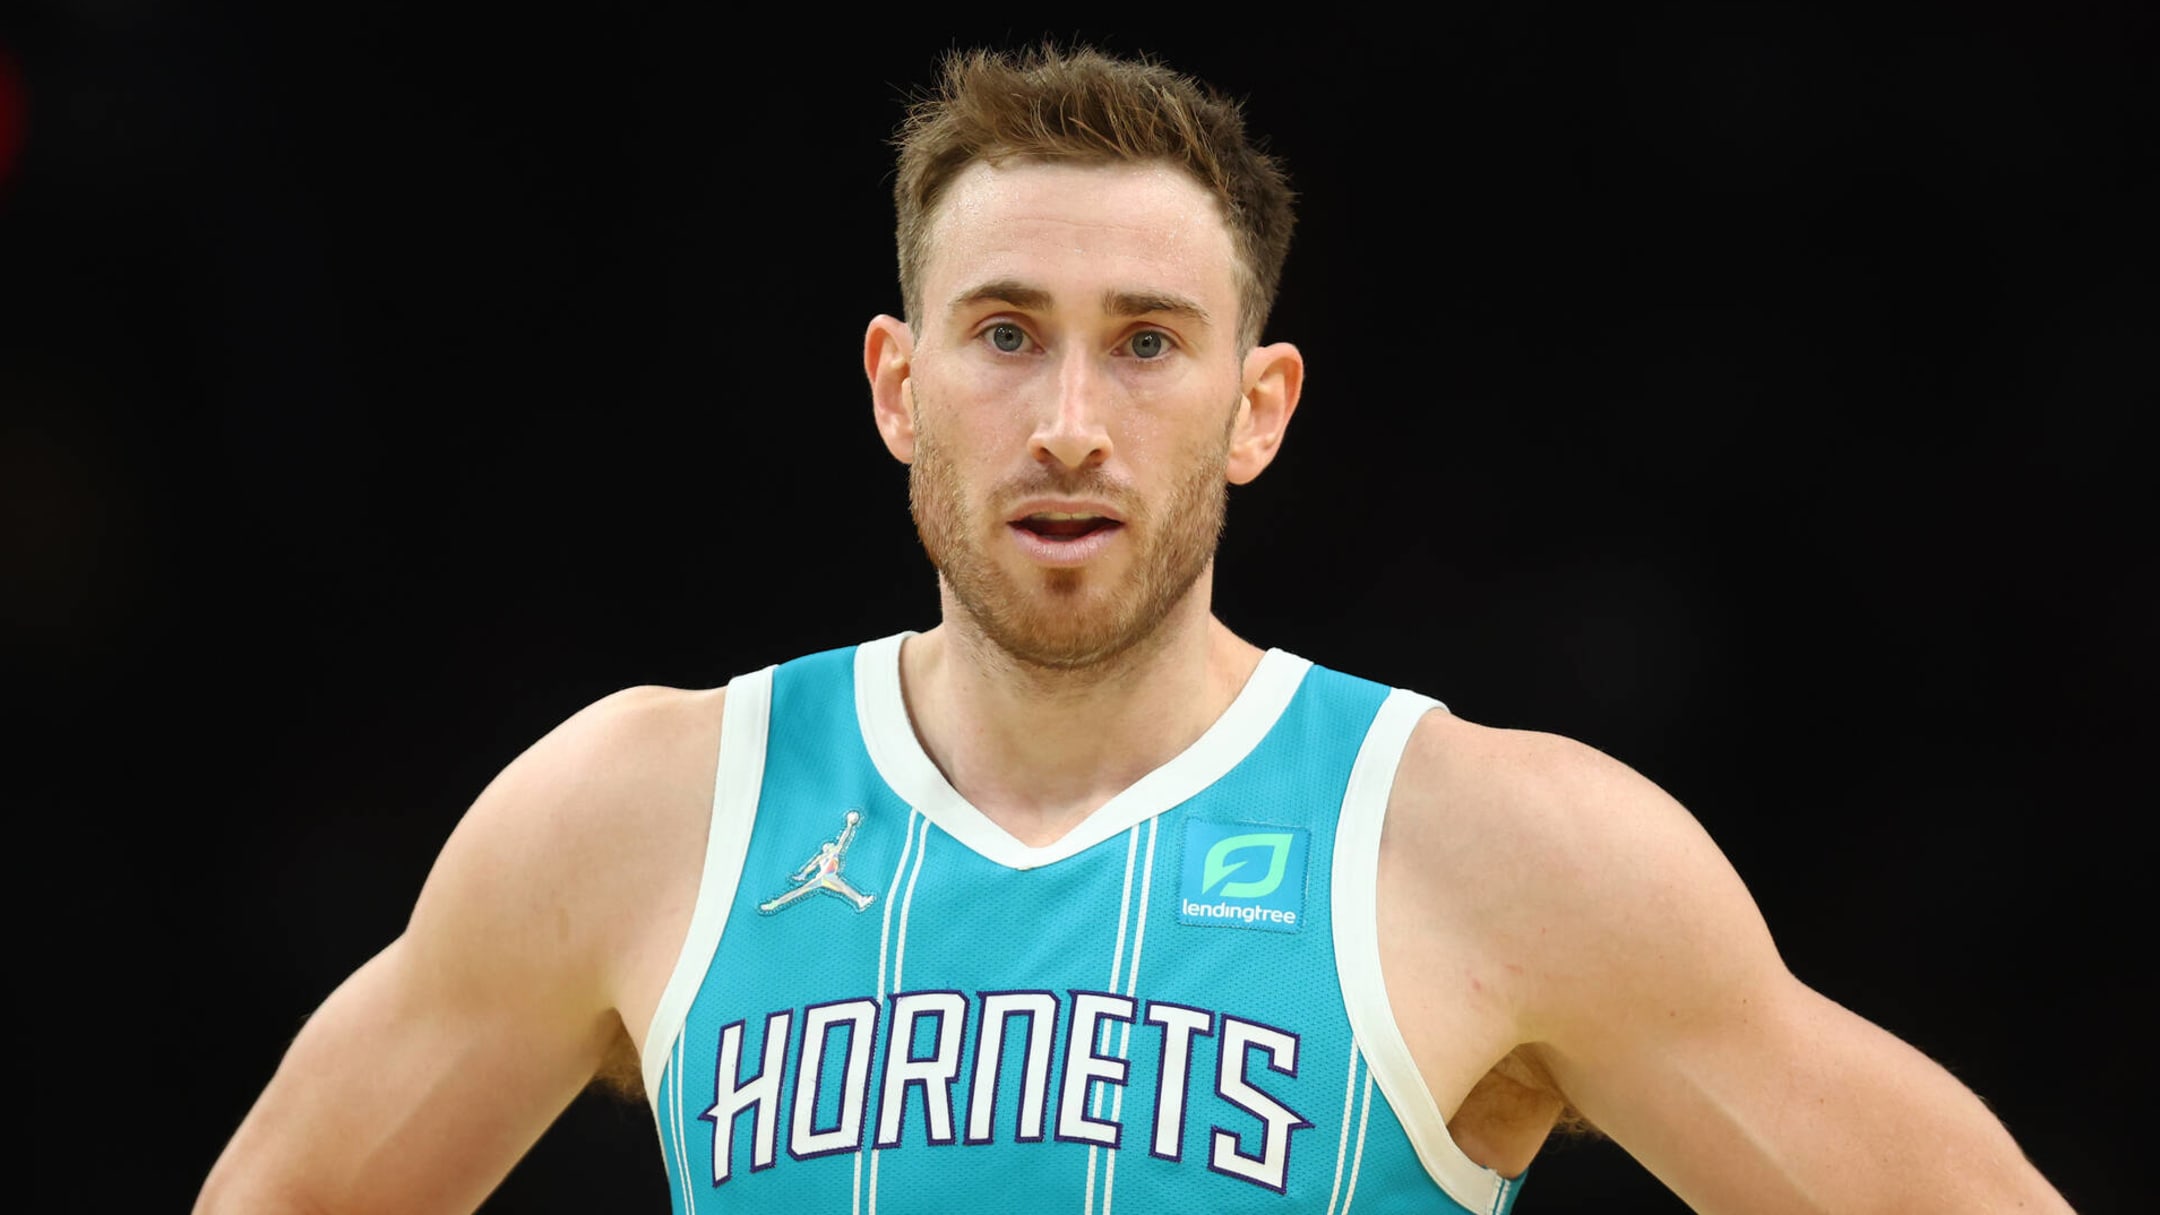 Gordon Hayward's wife blasts Hornets for 'not protecting players